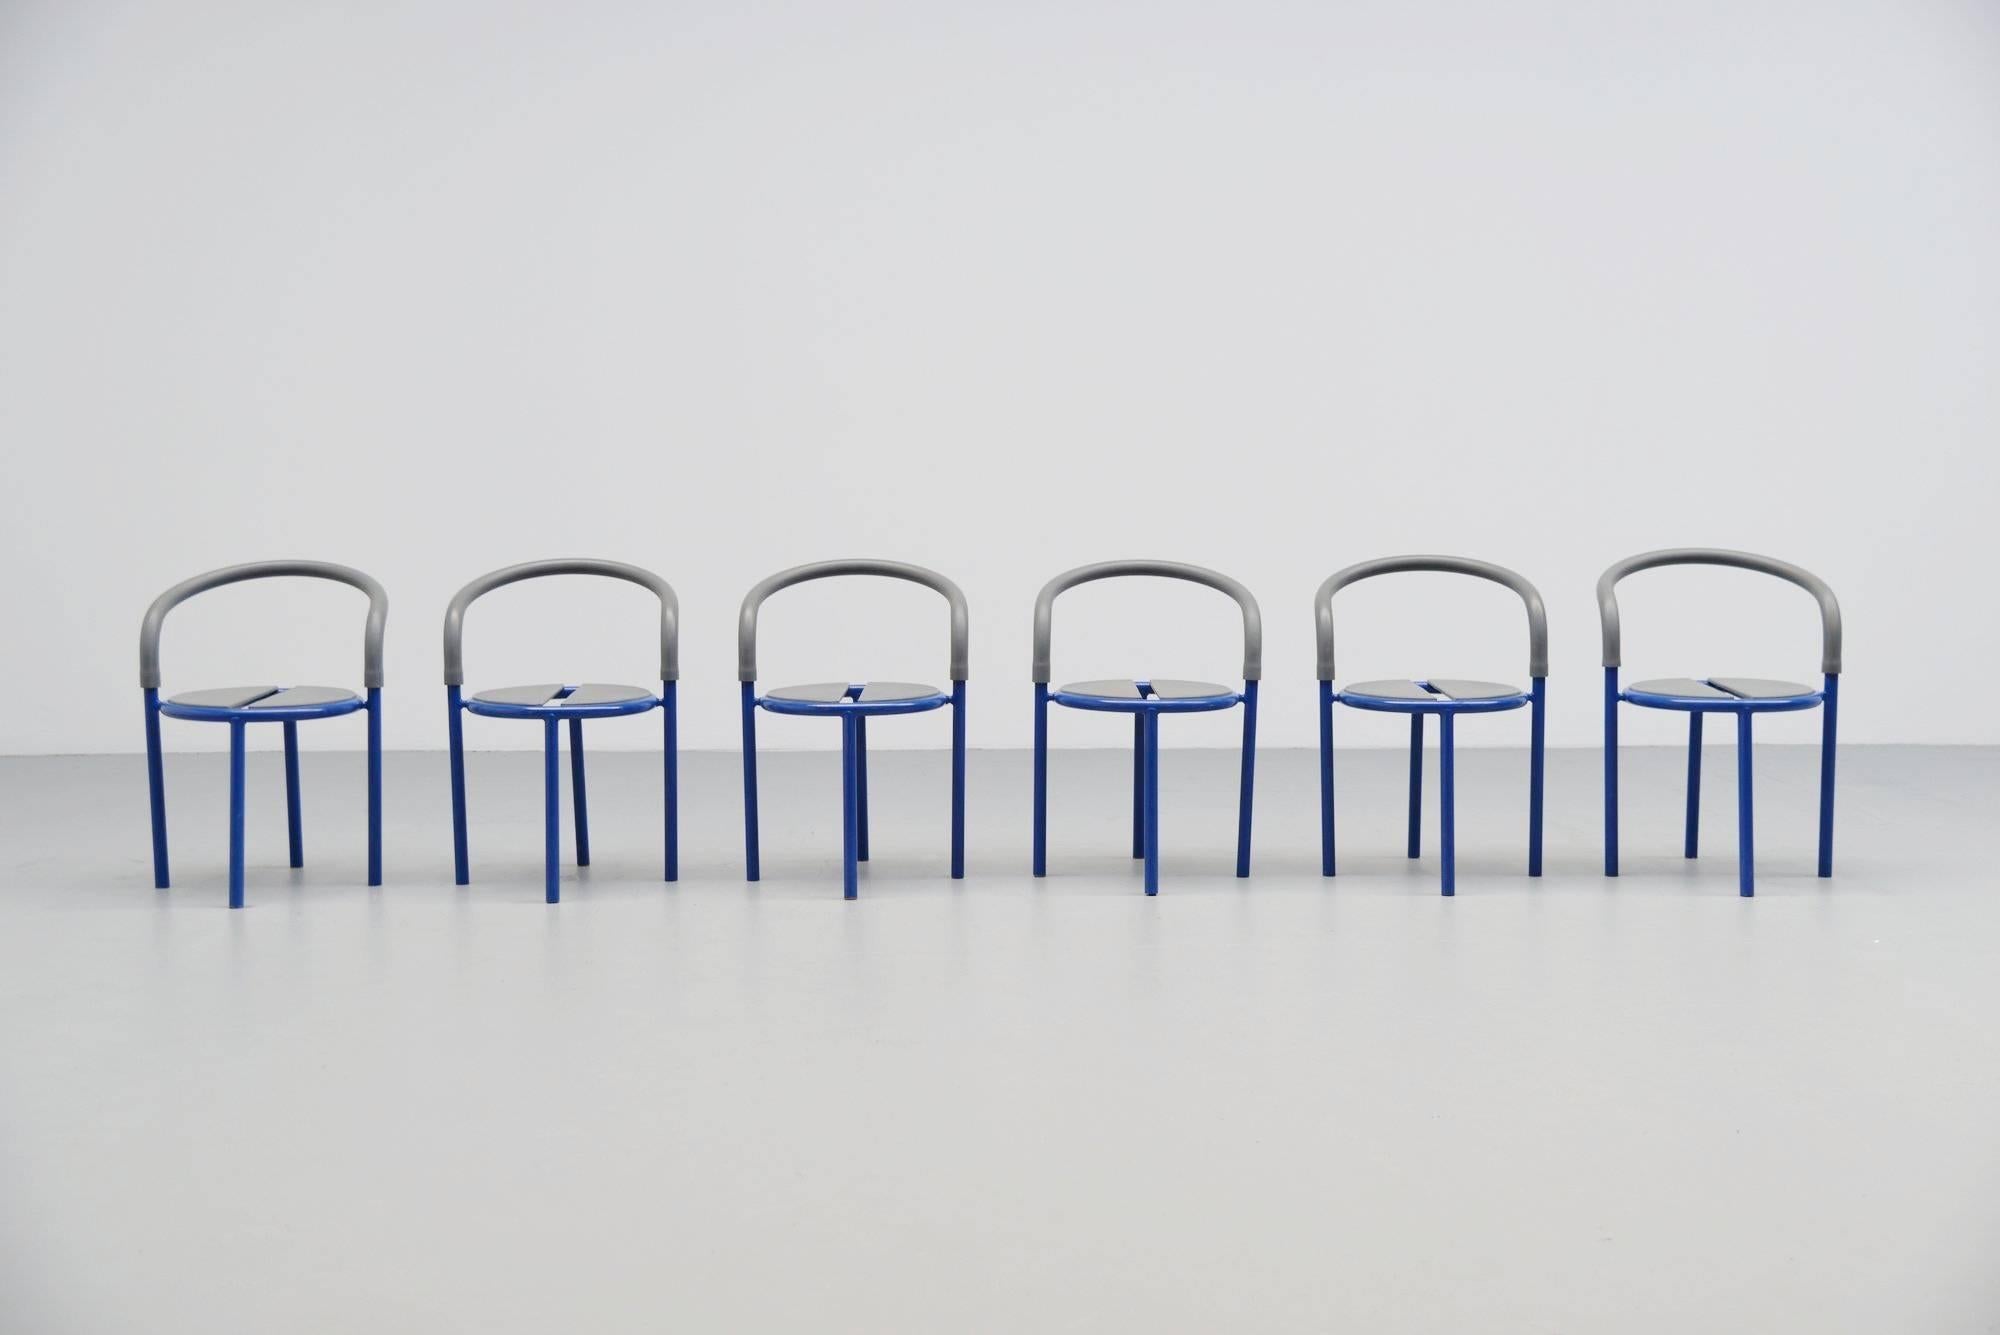 Very nice garden chairs designed by the Niels Gammelgaard for Fritz Hansen produced in 1990. Very nice shiny blue lacquered metal and rubber seat and back. Can be used outdoors as well, easy to clean. All in good condition and all marked with the